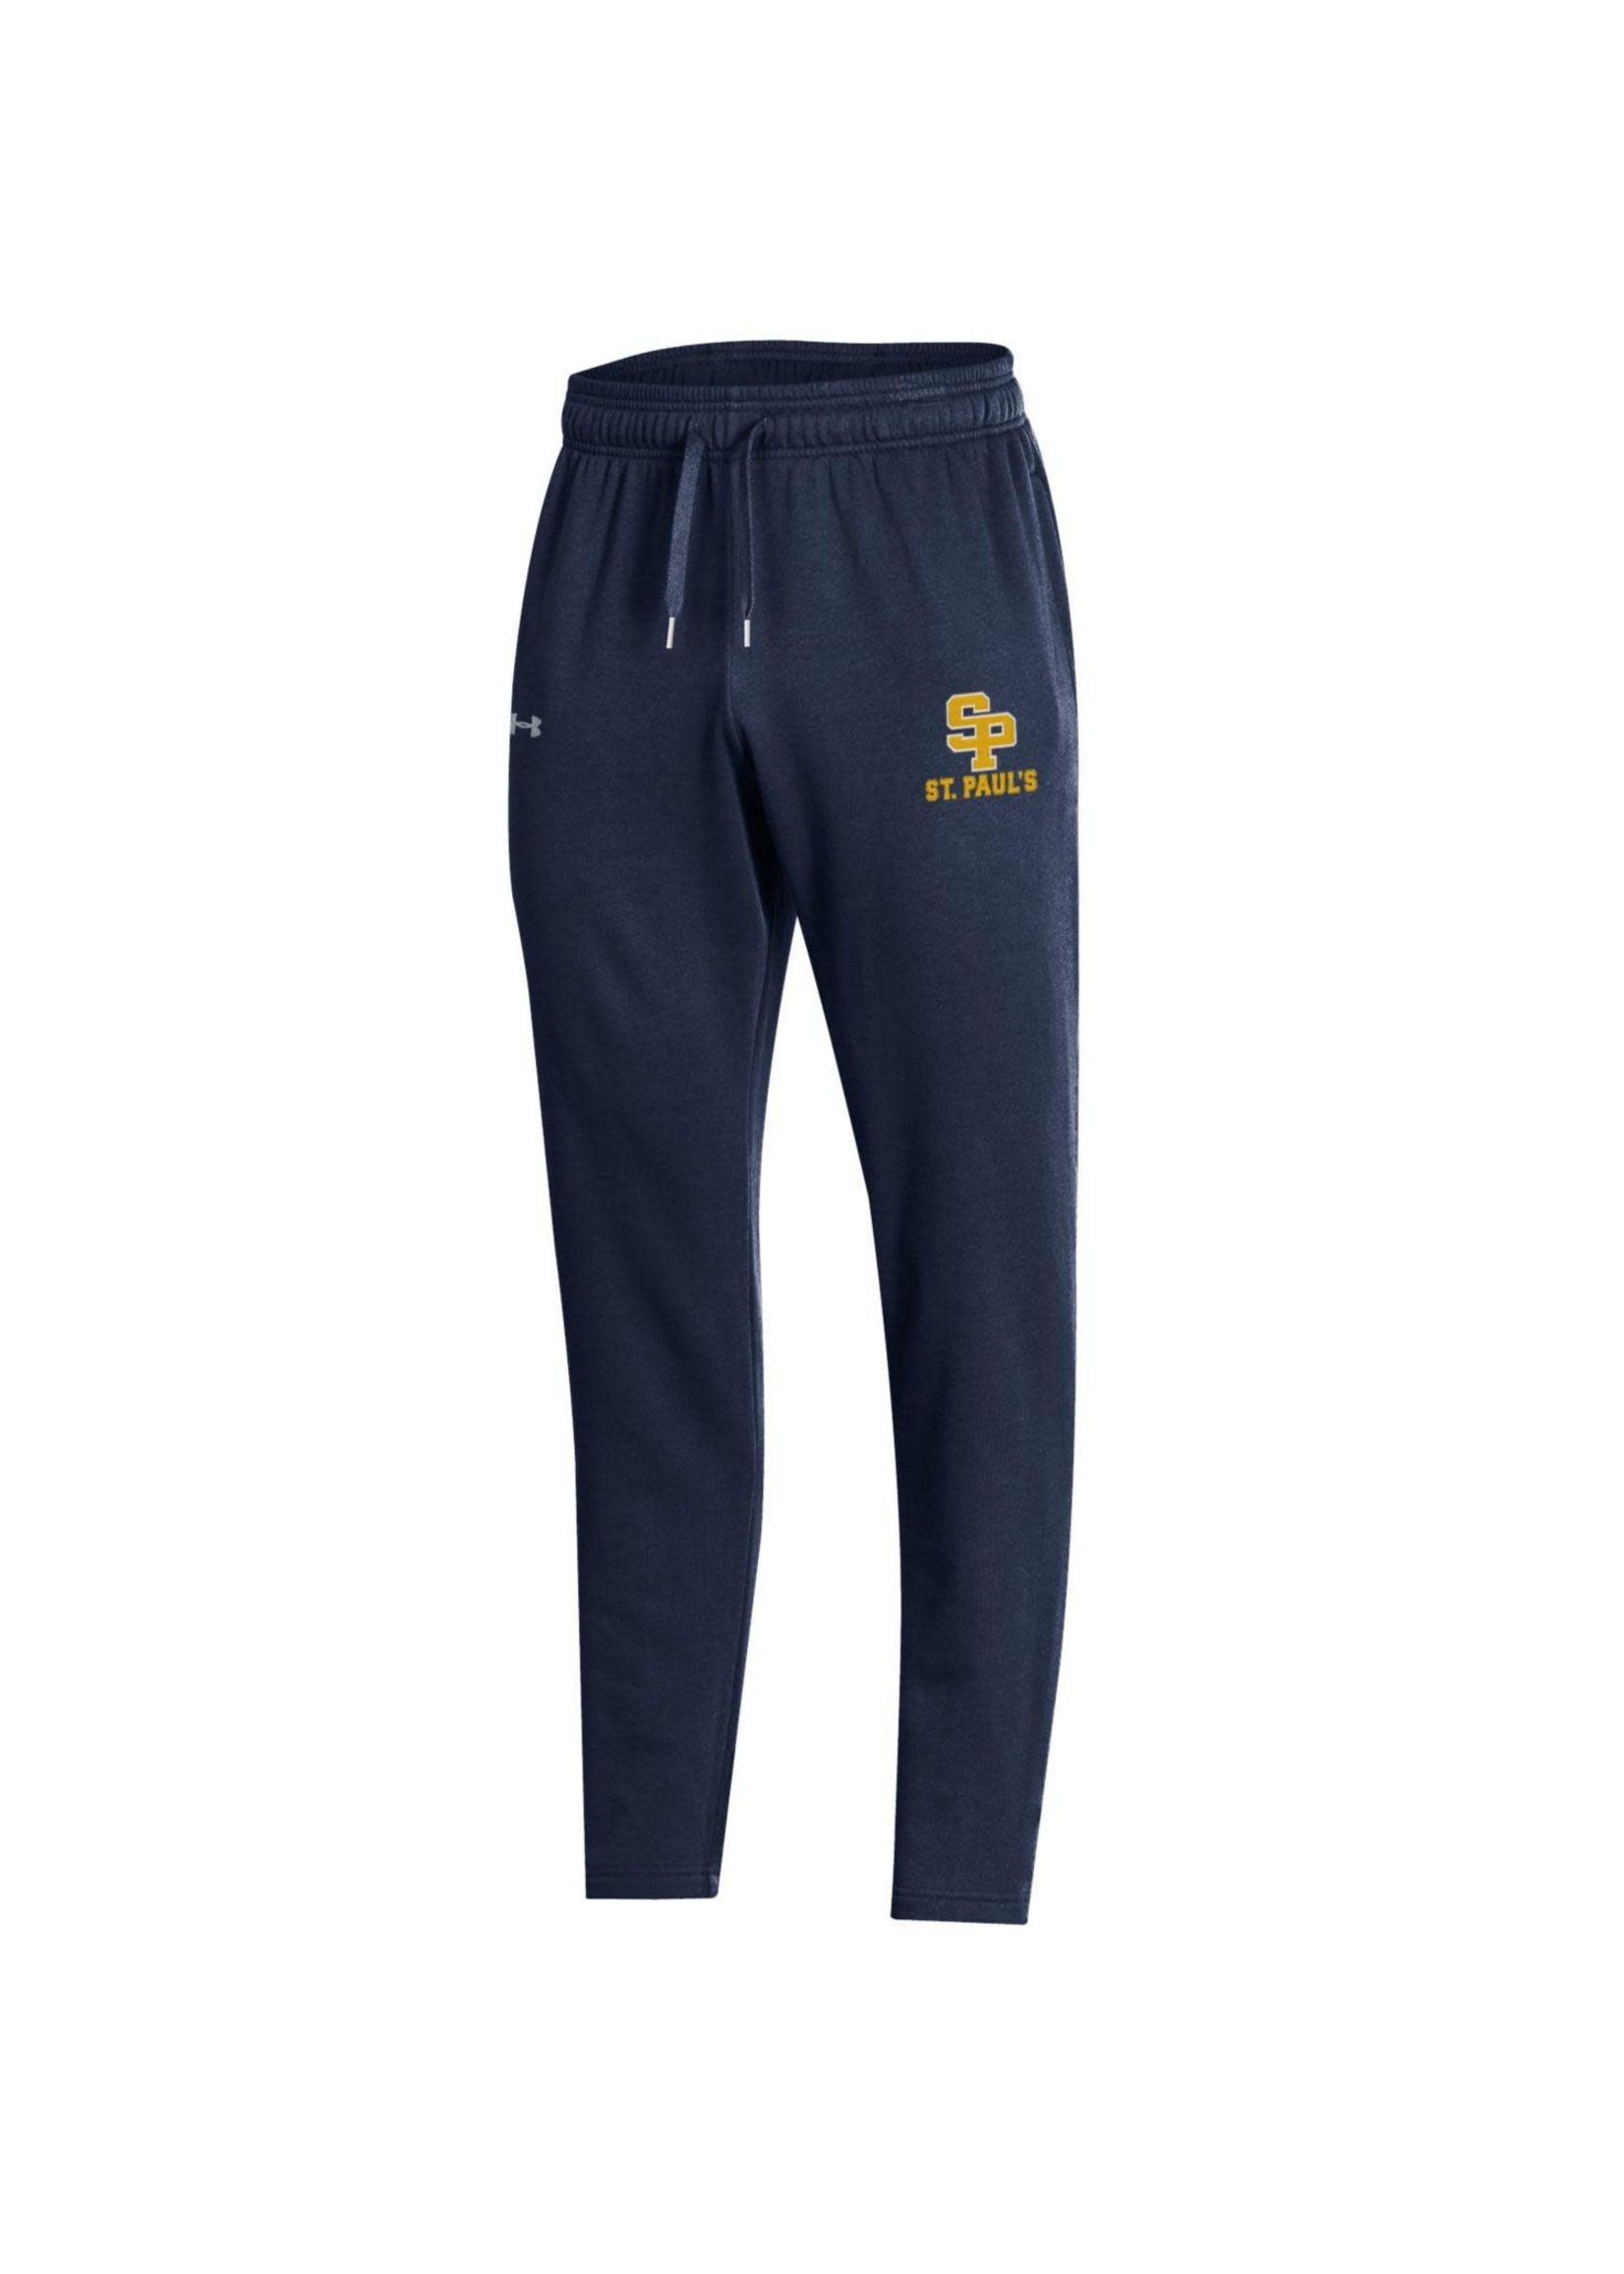 Under Armour UA Sweatpants All Day Open Bottom Adult SP